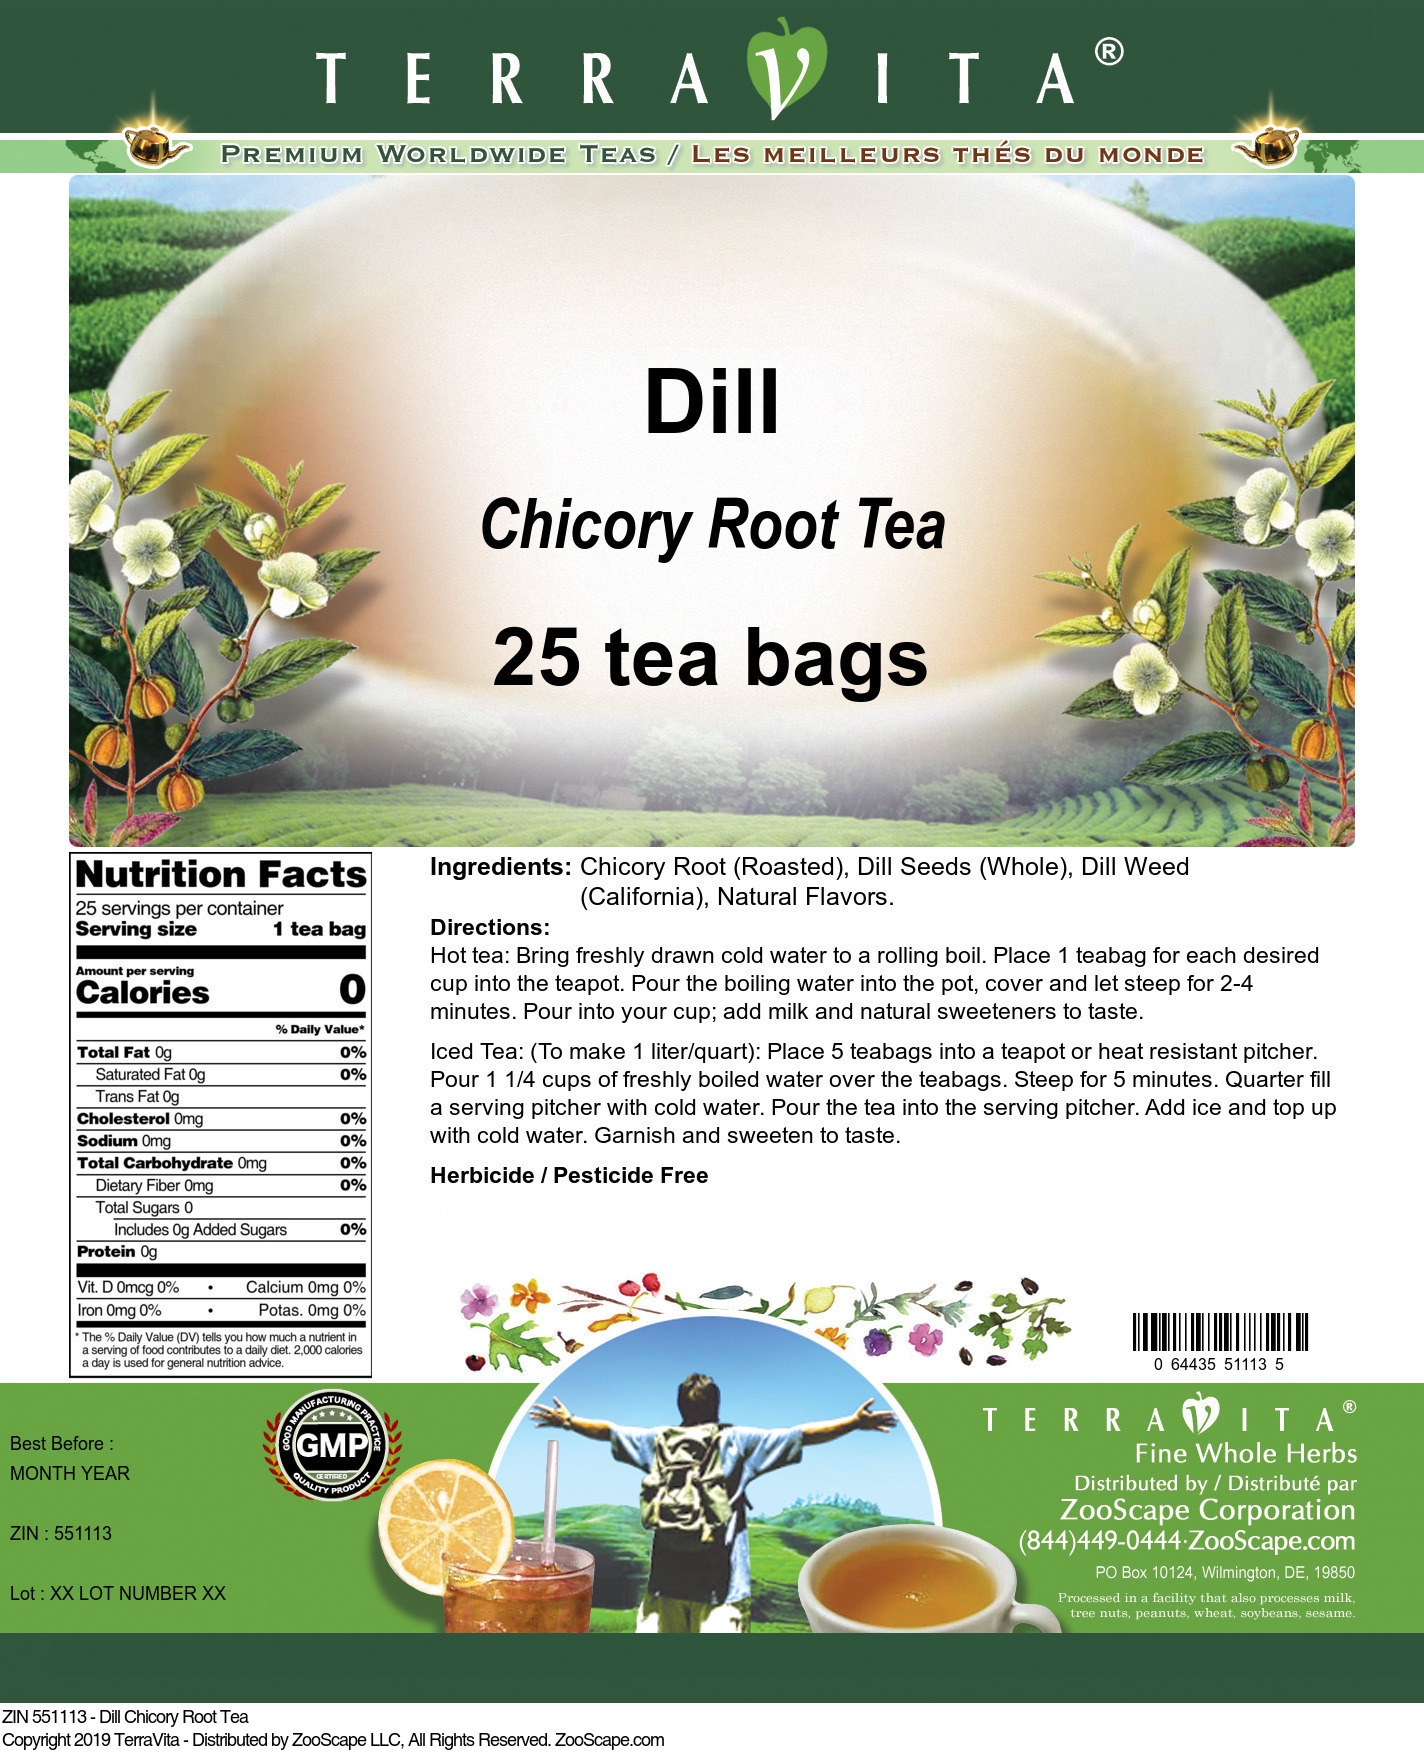 Dill Chicory Root Tea - Label